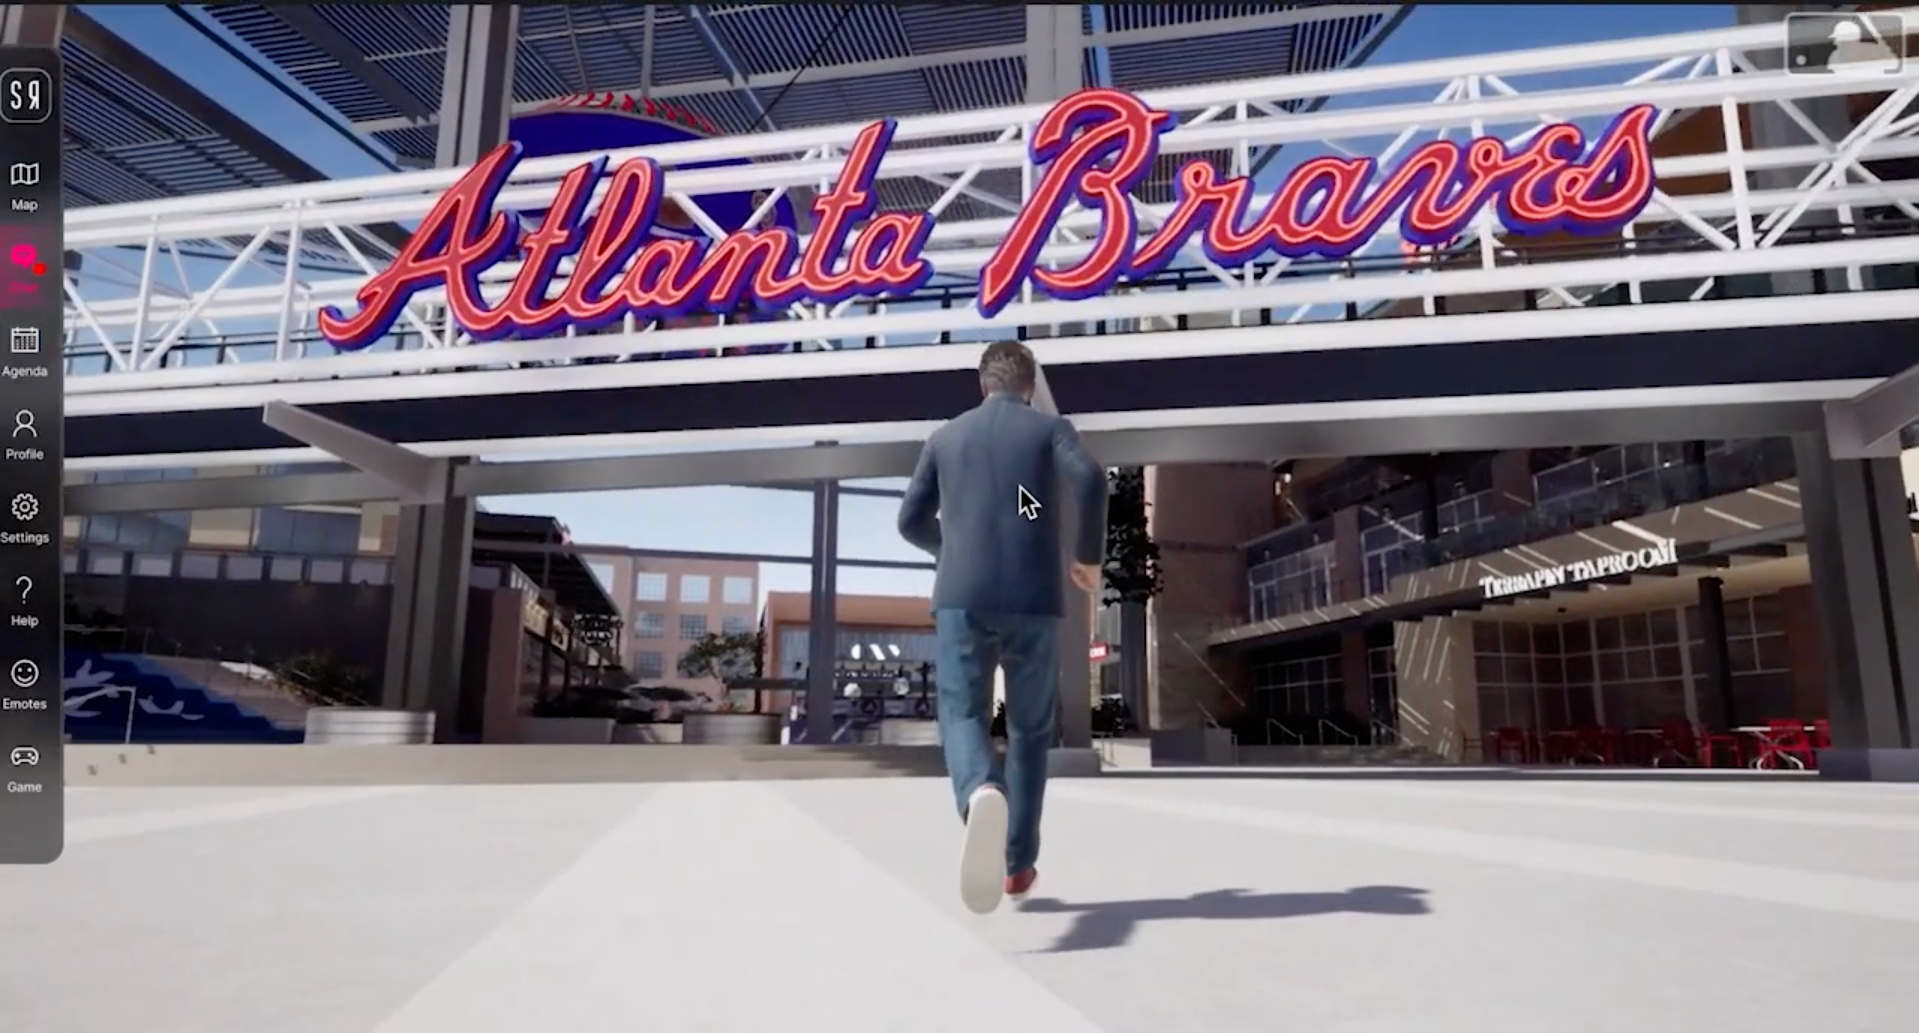 Atlanta Braves Enter the Metaverse With Launch of 'Digital Truist Park